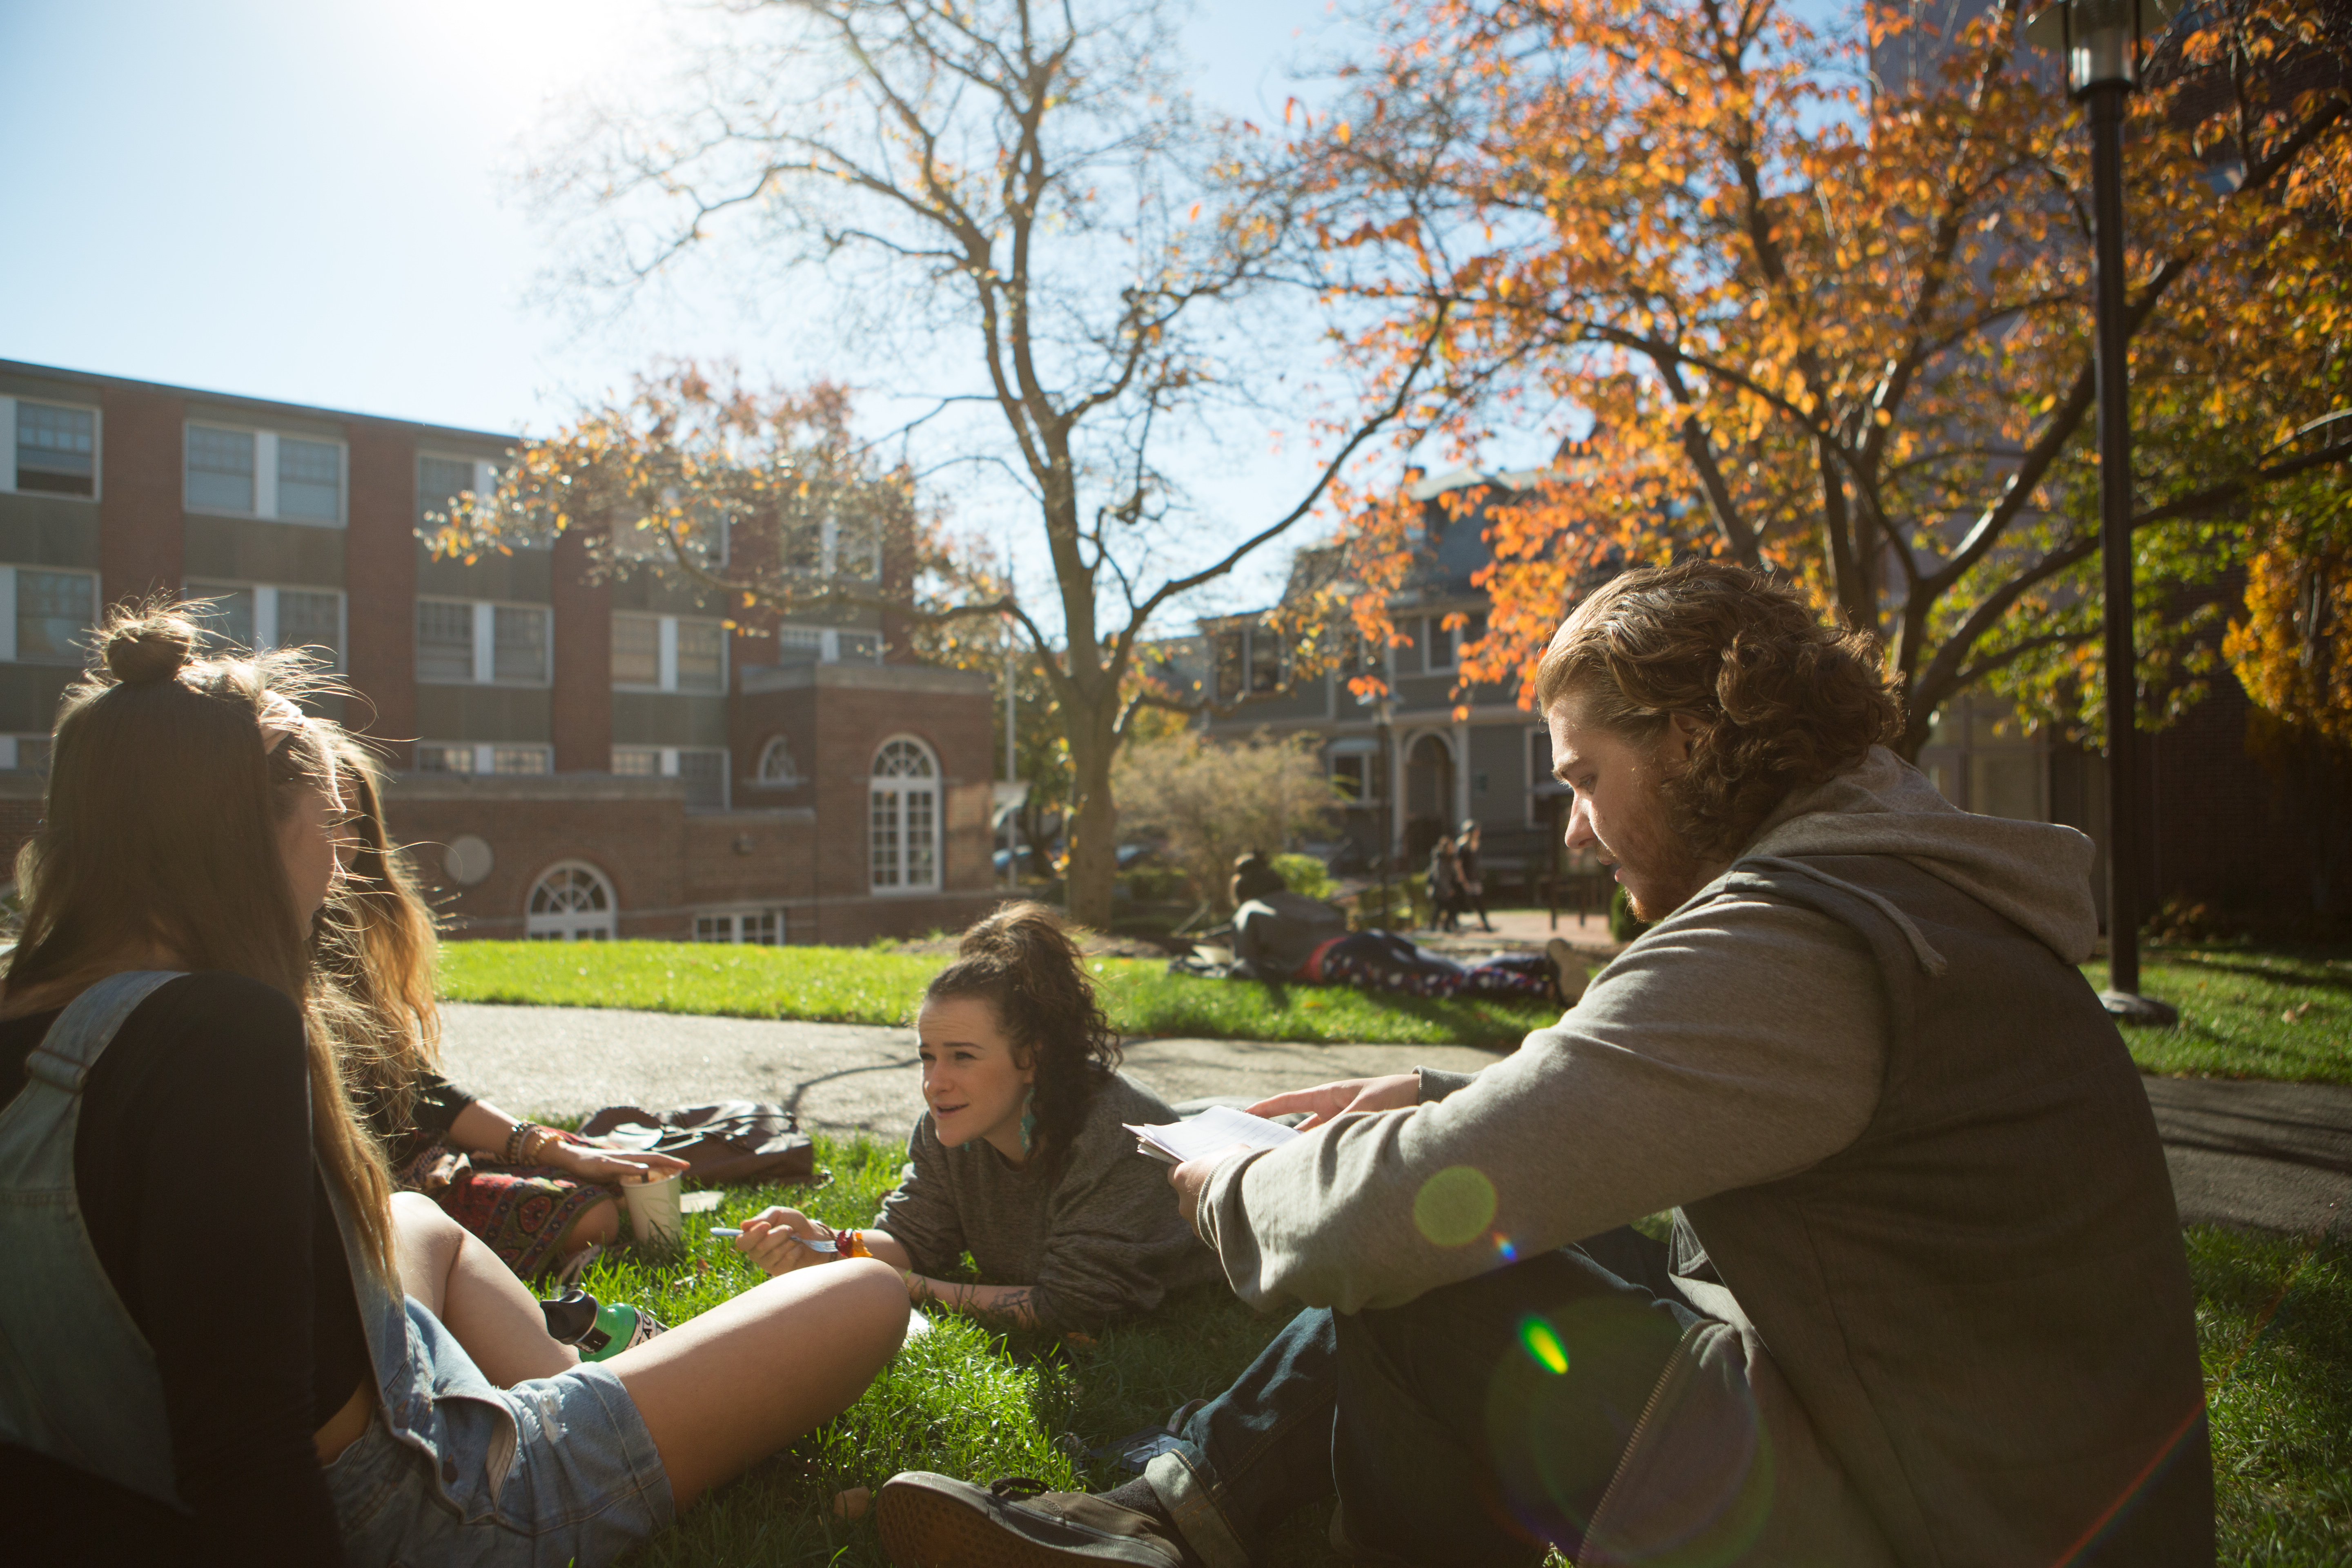 Students on the lawn of the Quad during Autumn